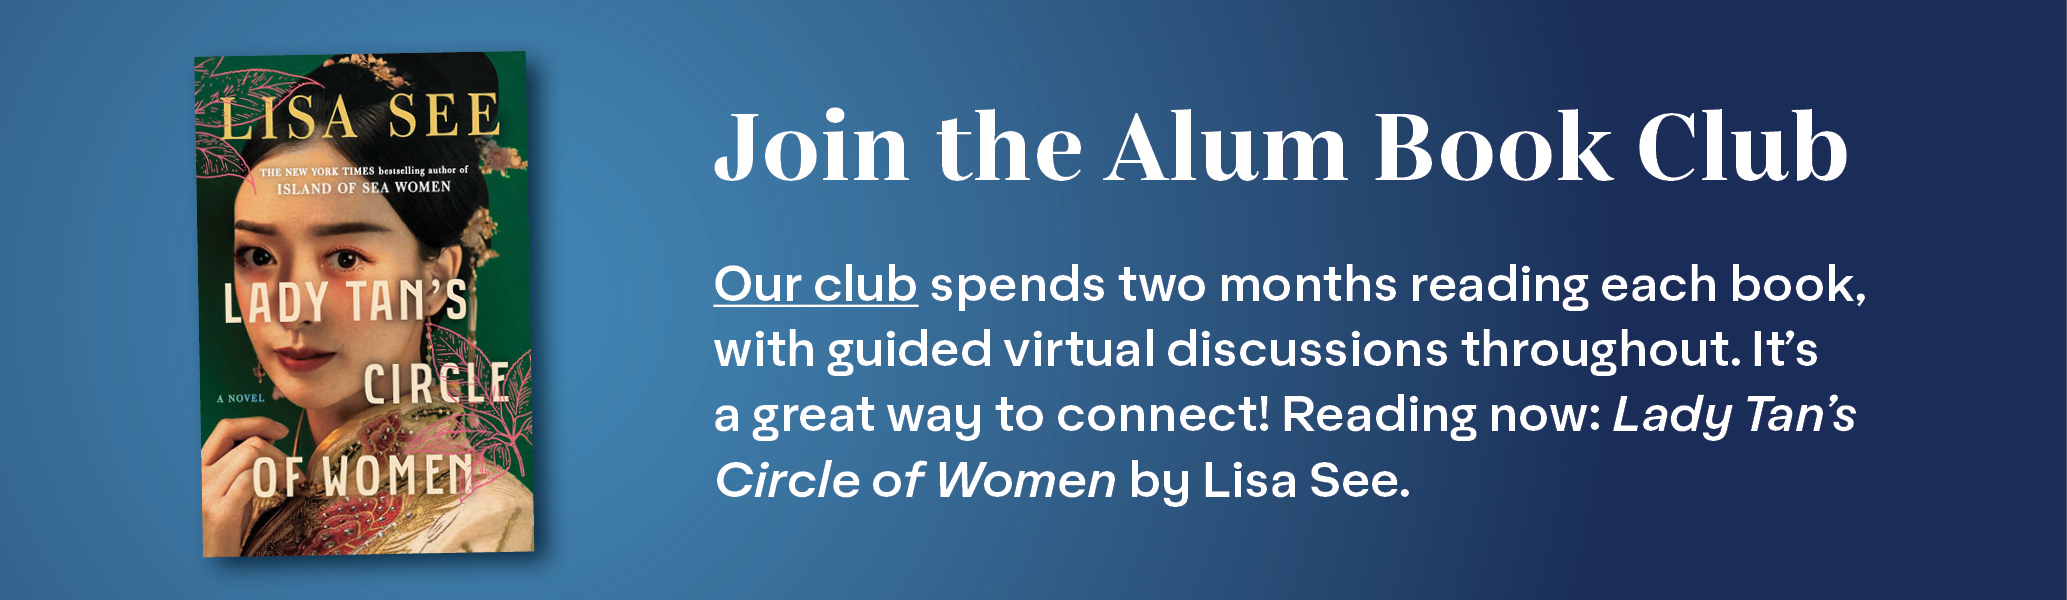 A promotional image highlighting Smith College's book club's latest reading pick, "Lady Tan's Circle of Women" by Lisa See.